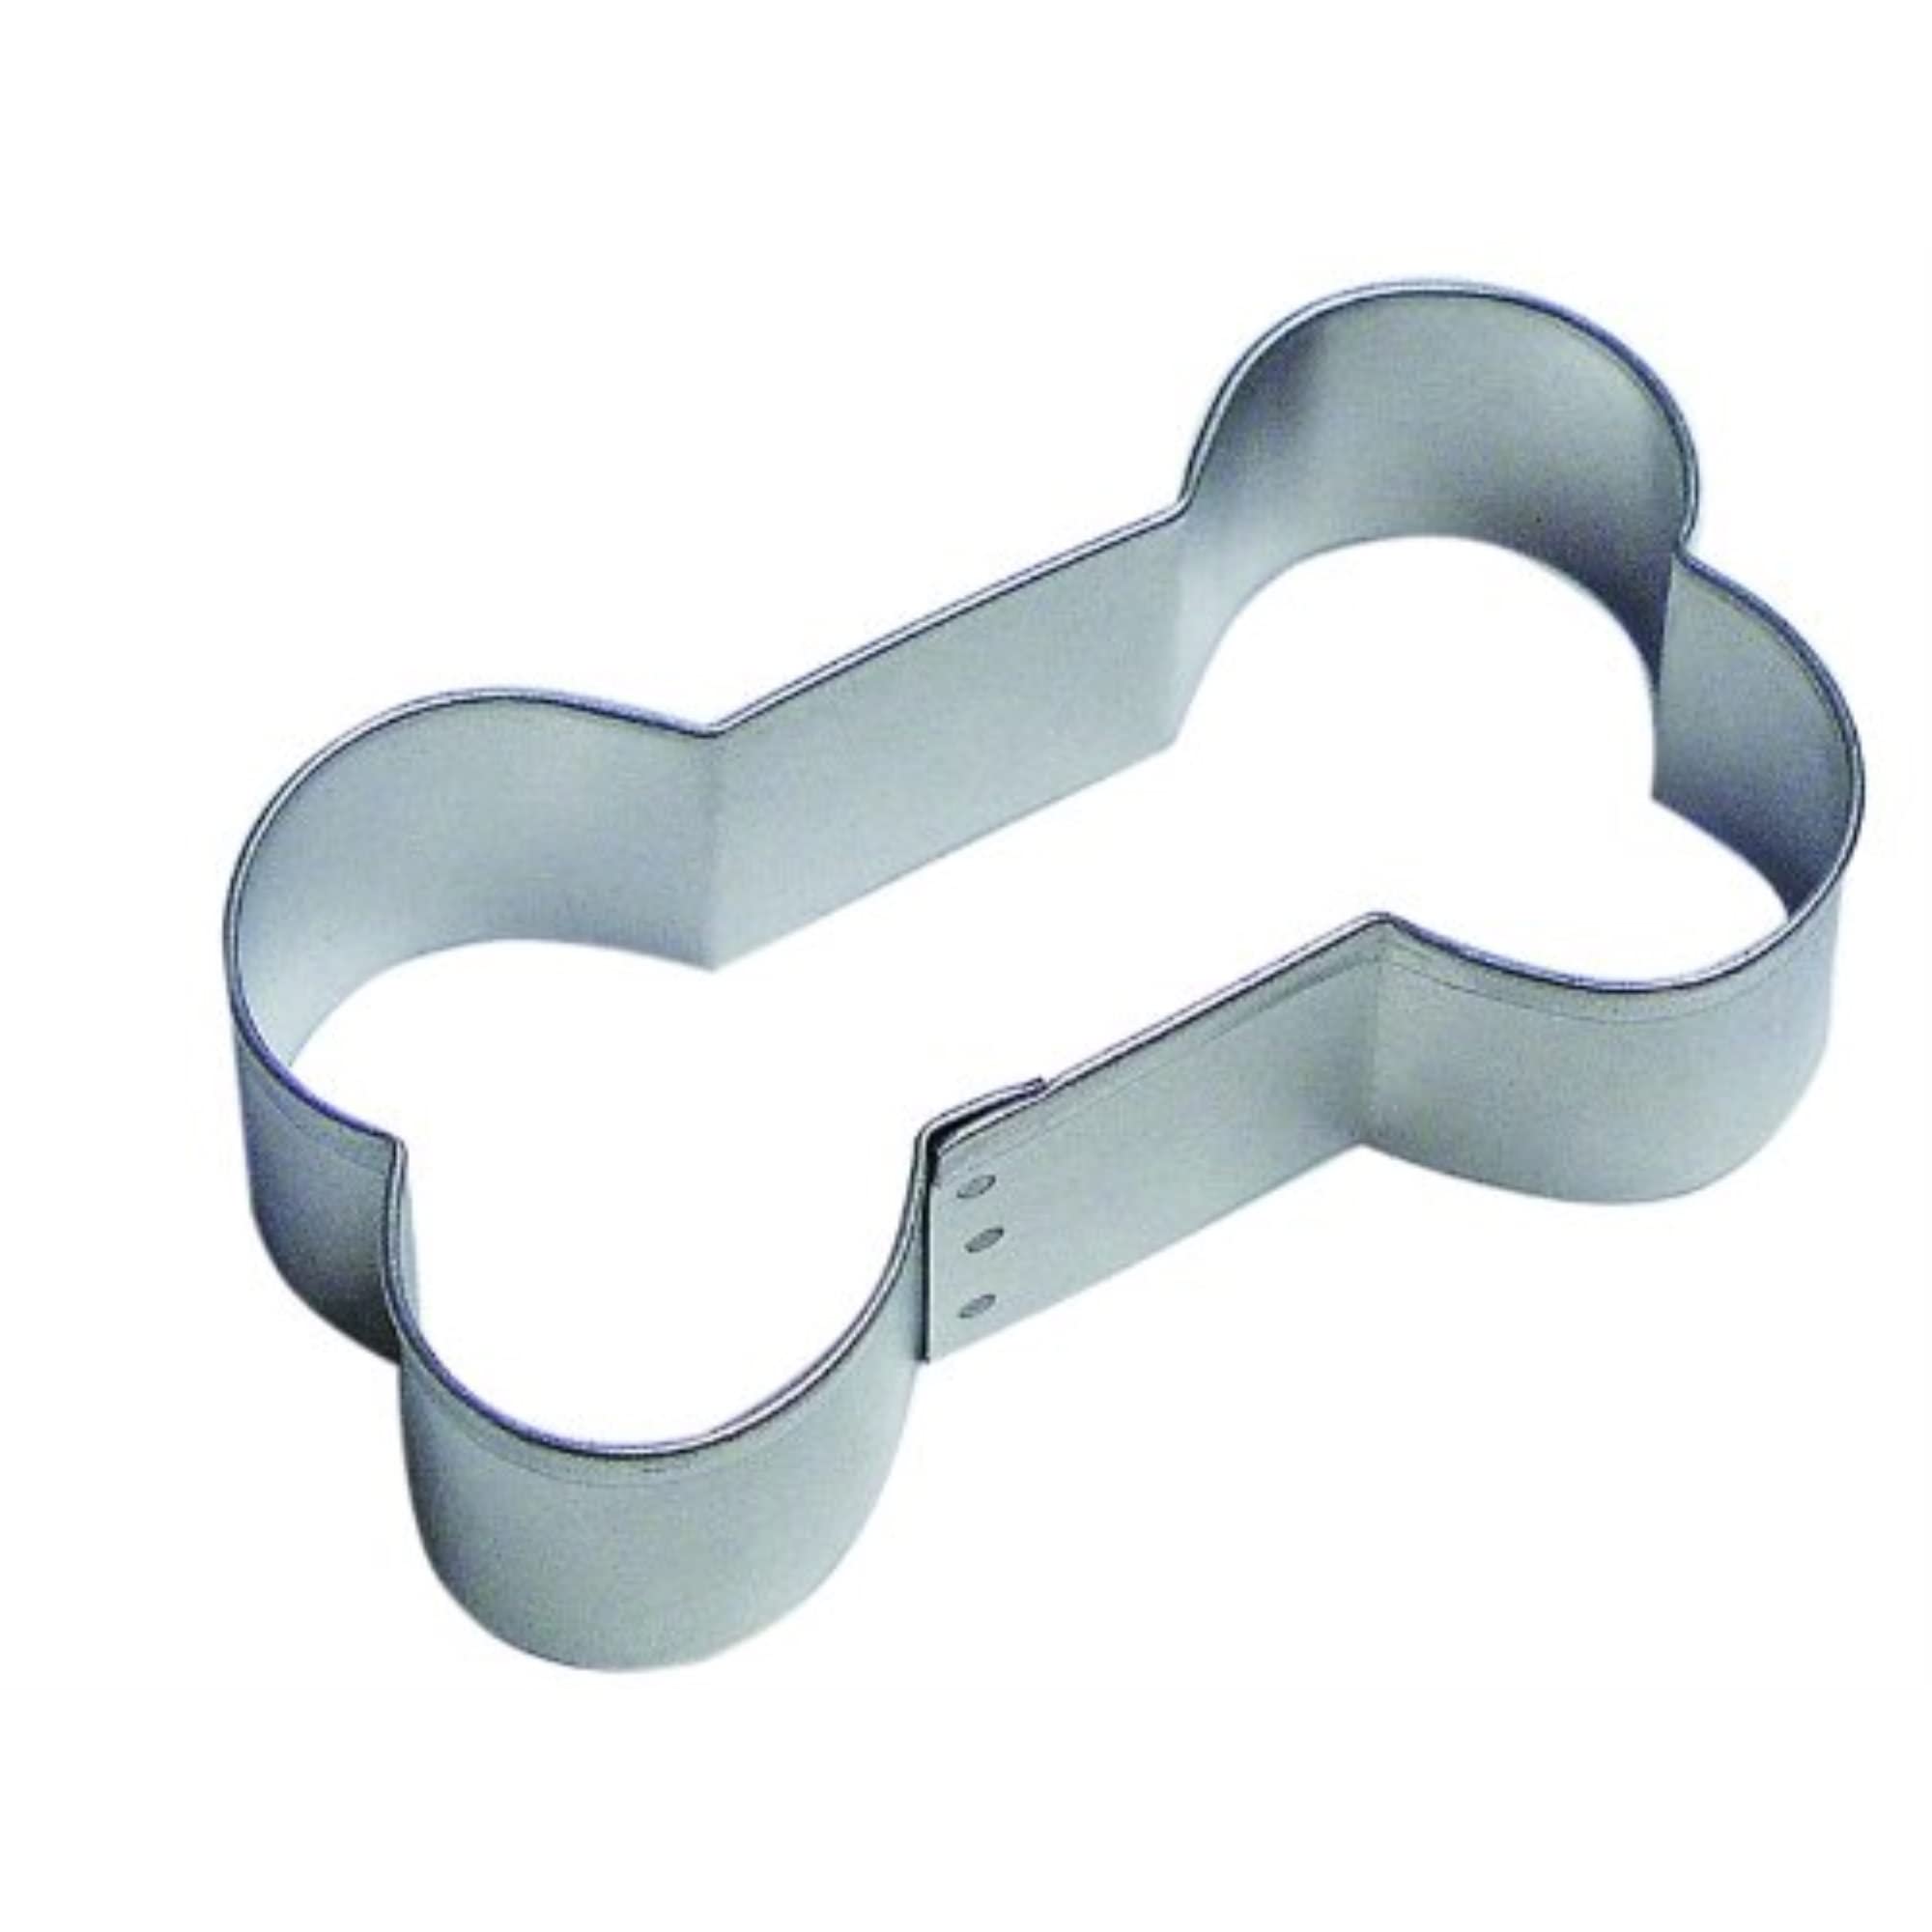 CybrTrayd R&M Dog Bone 3.5" Cookie Cutter In Durable, Economical, Tinplated Steel